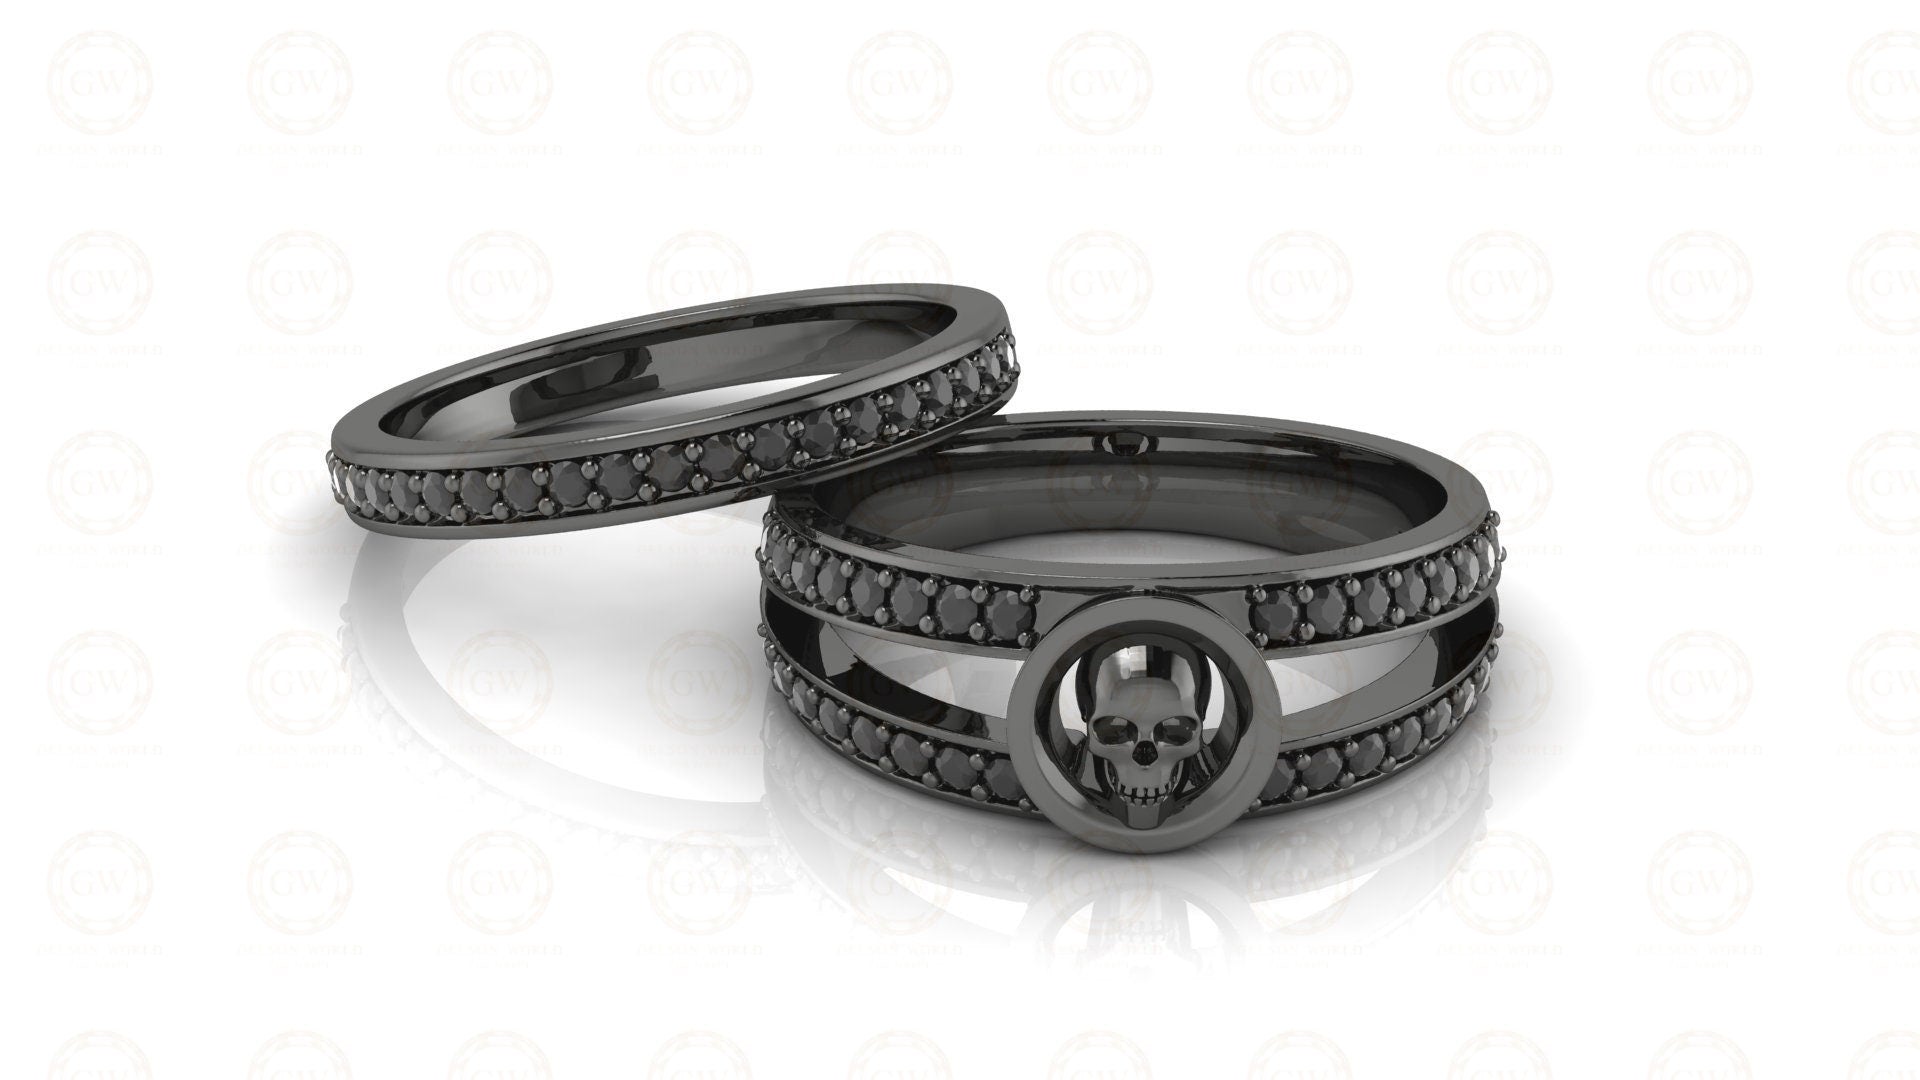 0.45 Ct Unique Black Gothic Halo Bridal Skull Engagement Ring Set, Matching Skull Wedding Rings, Sterling silver, Half Eternity Band